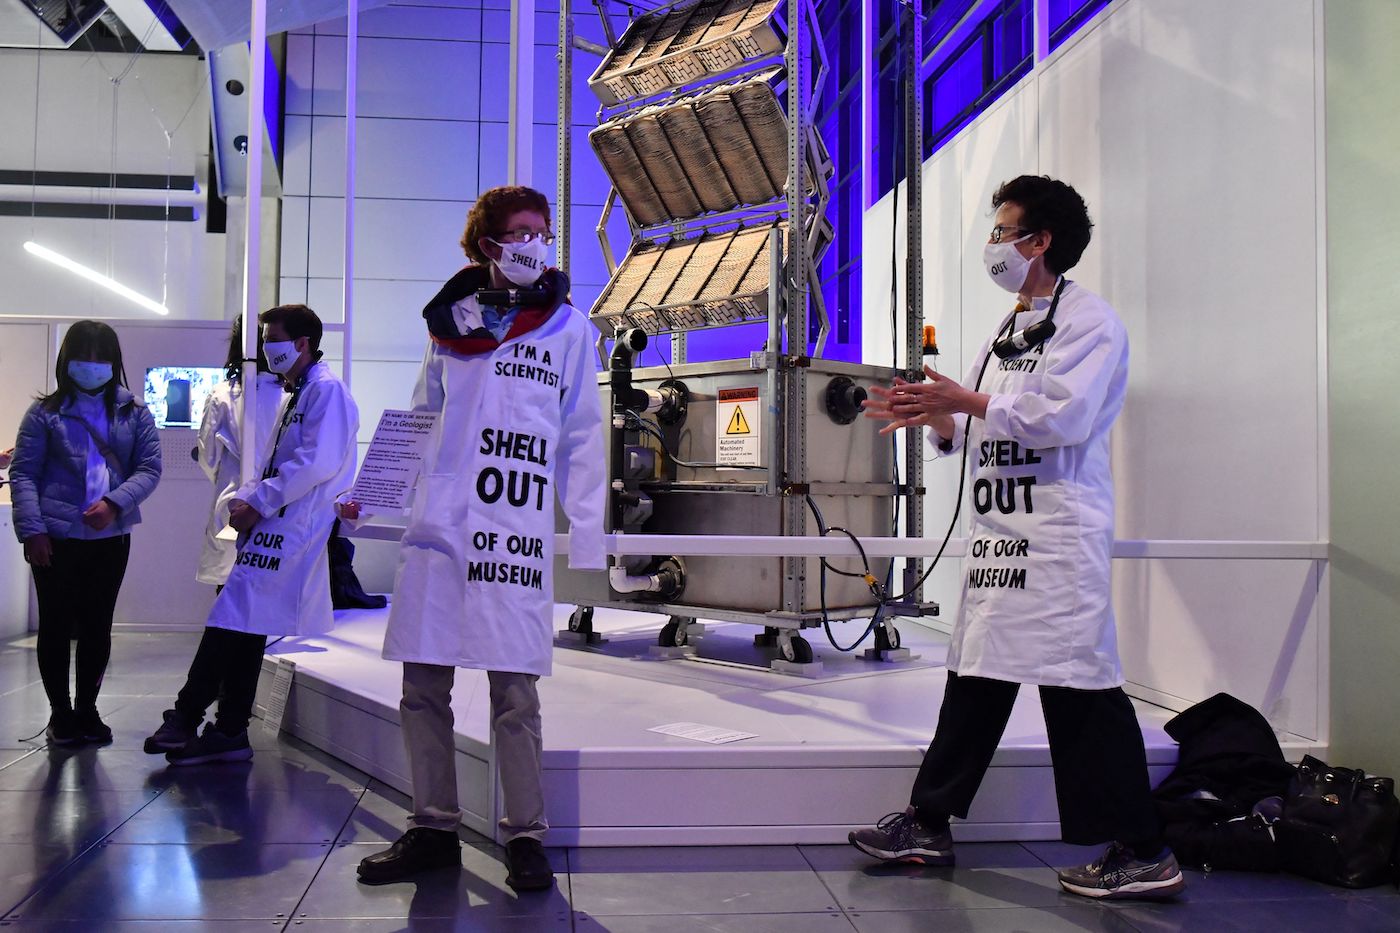 Protestors chain themselves to a museum exhibit with coats that say I am a scientist, Shell out